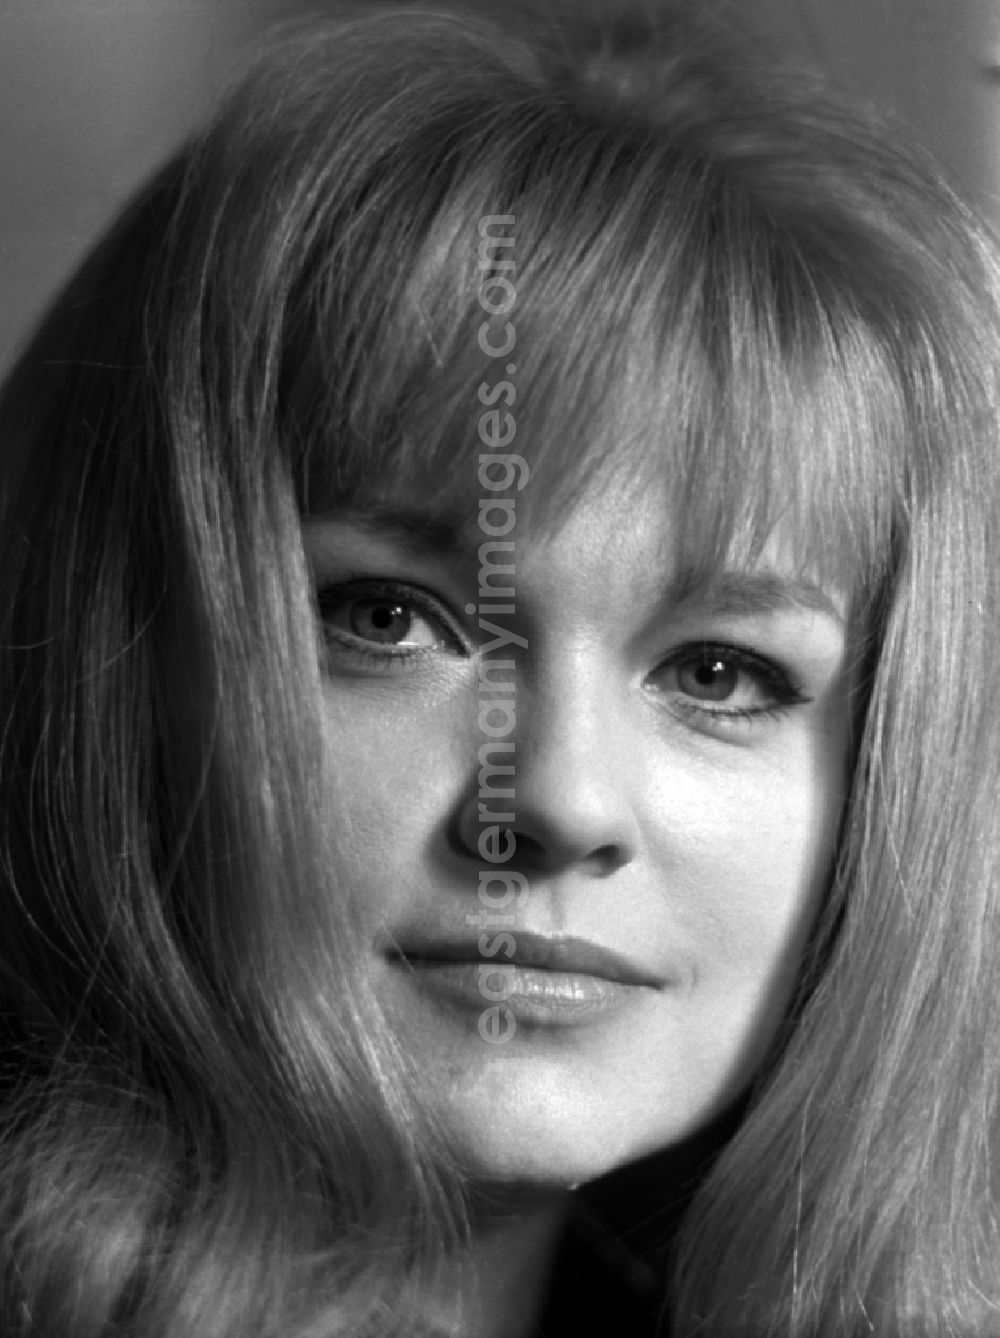 GDR picture archive: Berlin - The actress Eva-Maria Hagen in Berlin, the former capital of the GDR, German Democratic Republic